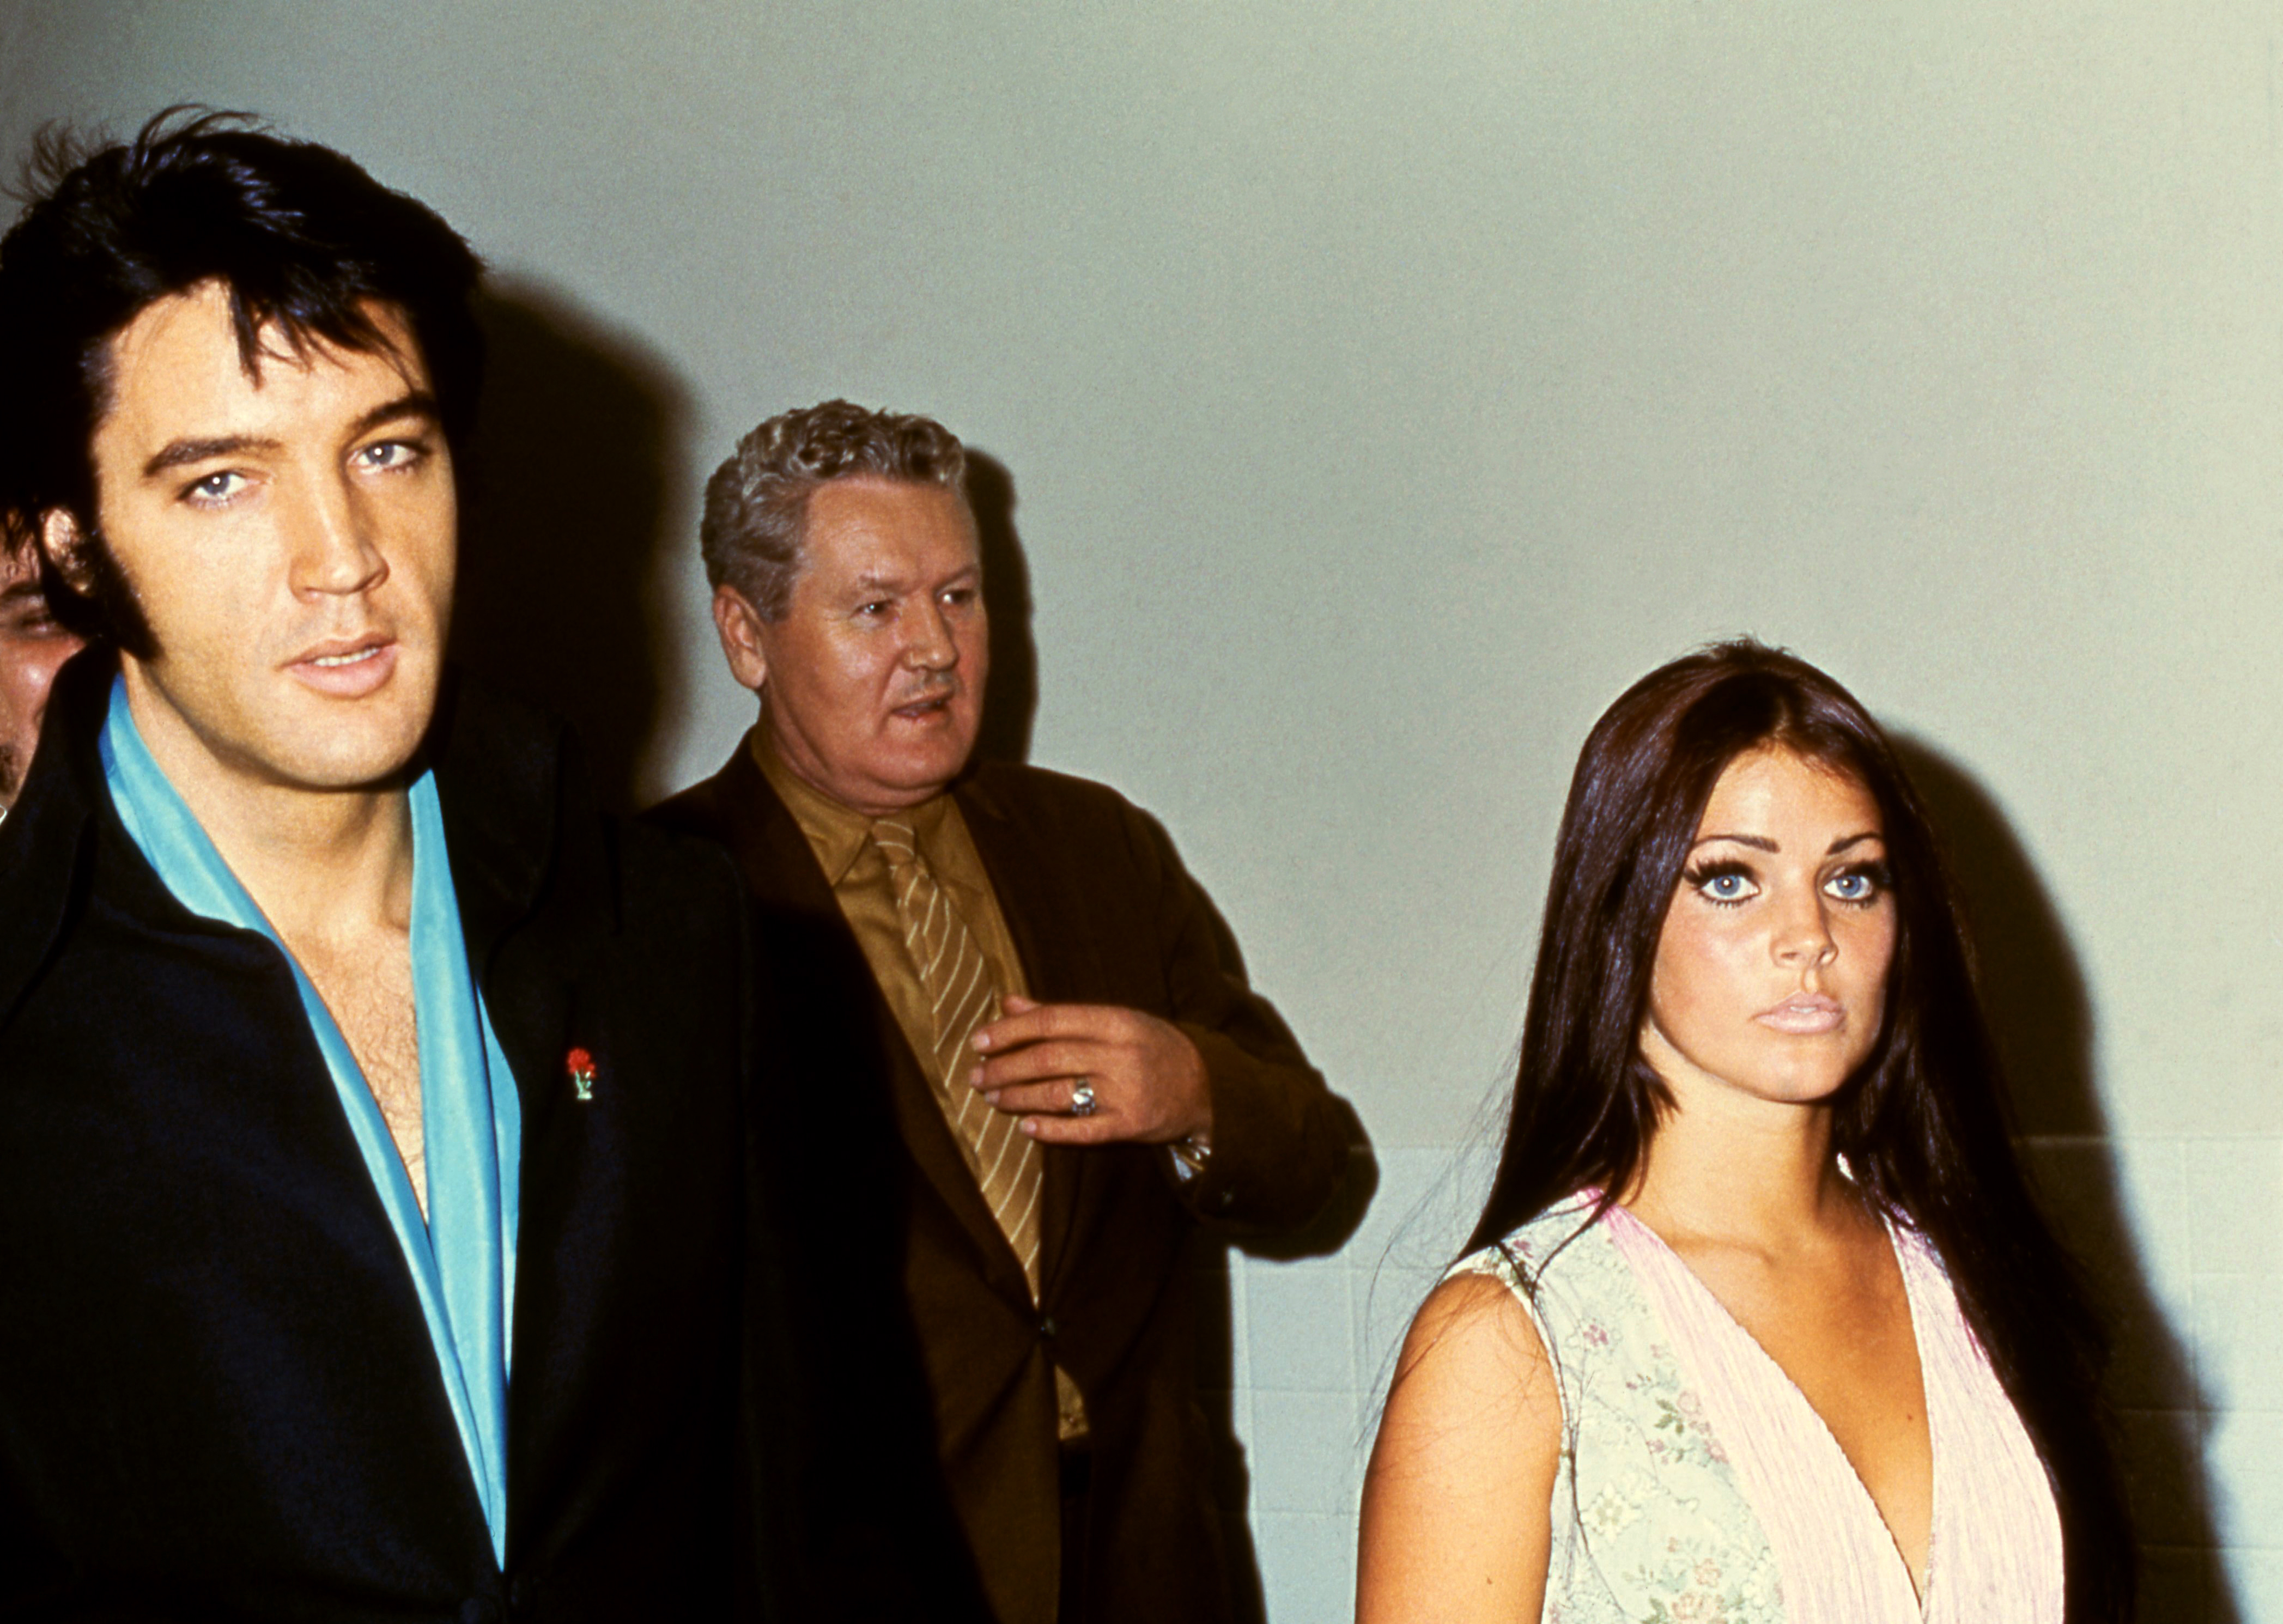 Elvis Presley, Elvis's father Vernon, and Priscilla Presley, and Elvis's father Vernon Presley in 1970. | Source: Getty Images